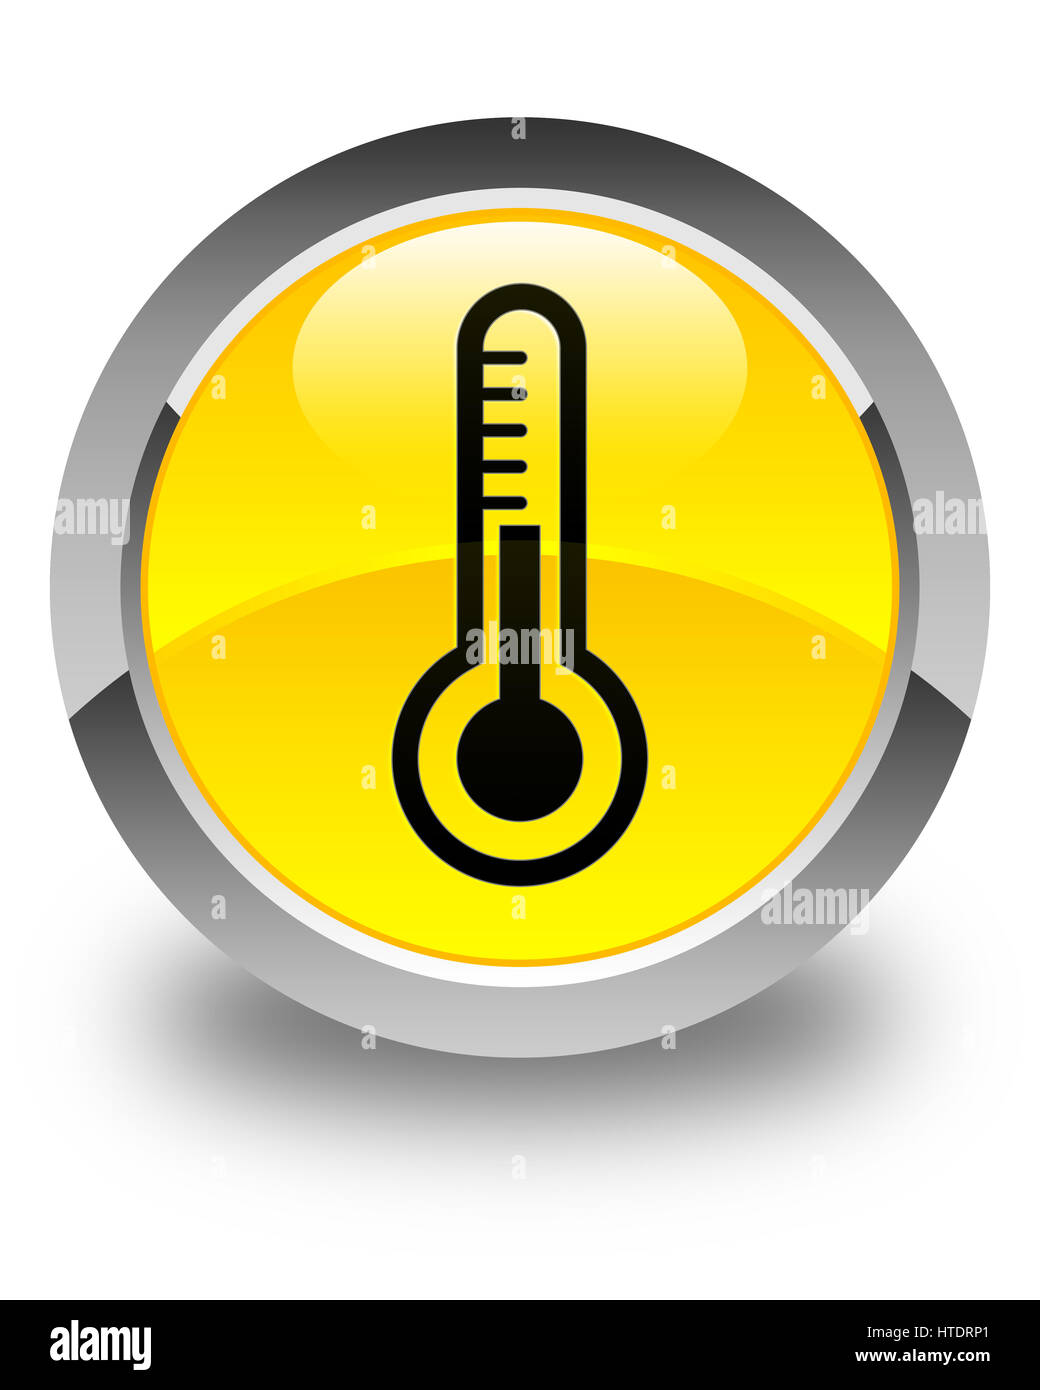 Thermometer icon isolated on glossy yellow round button abstract illustration Stock Photo